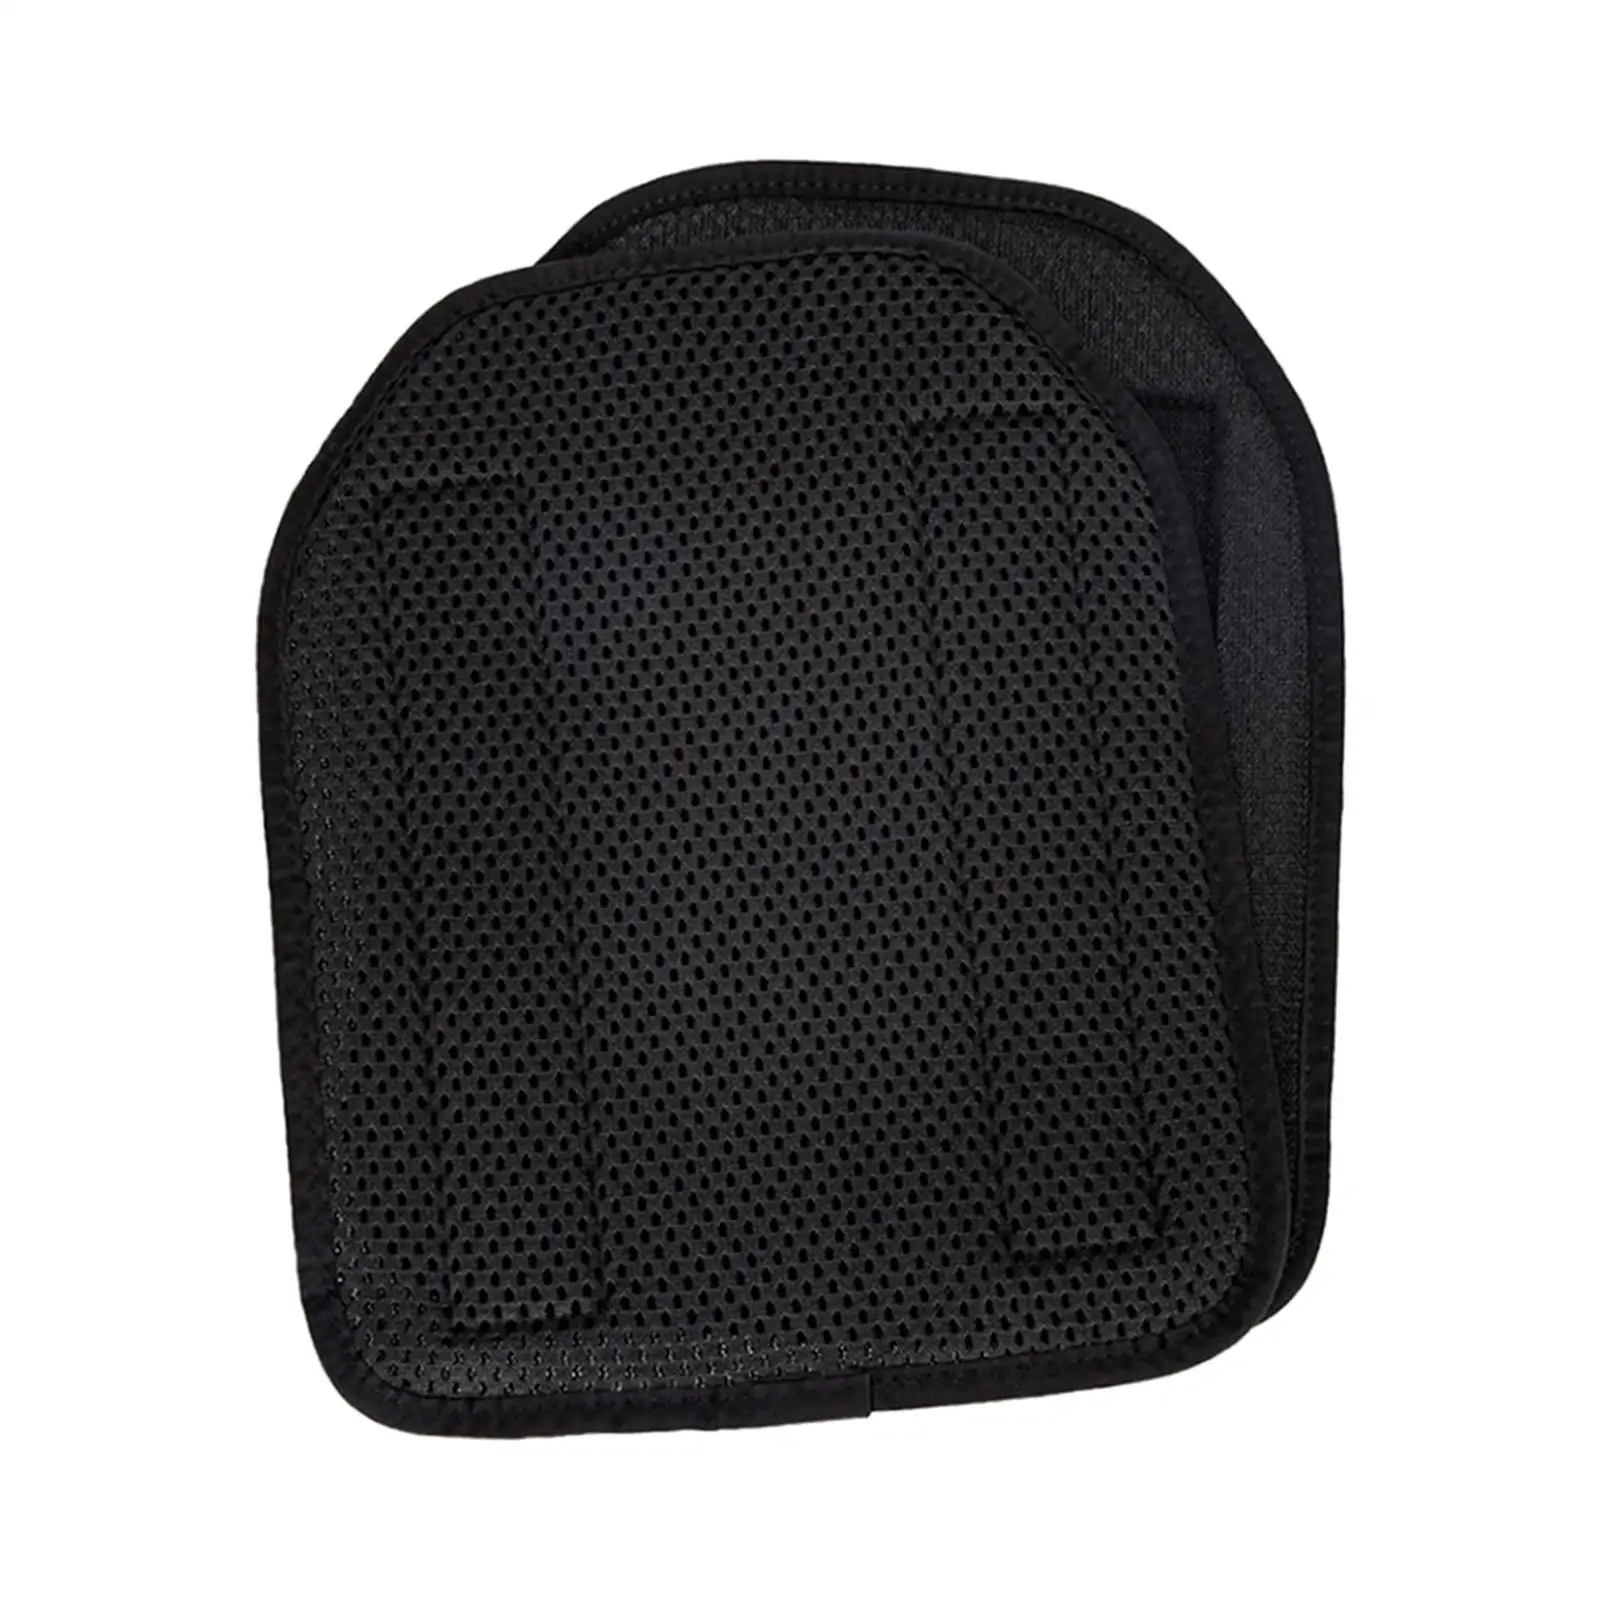 2 Pieces Gear Vest Inner Liner Body Vest Plates Adjustable Back Thoracic Protection Vest Pad Plates for Outdoor